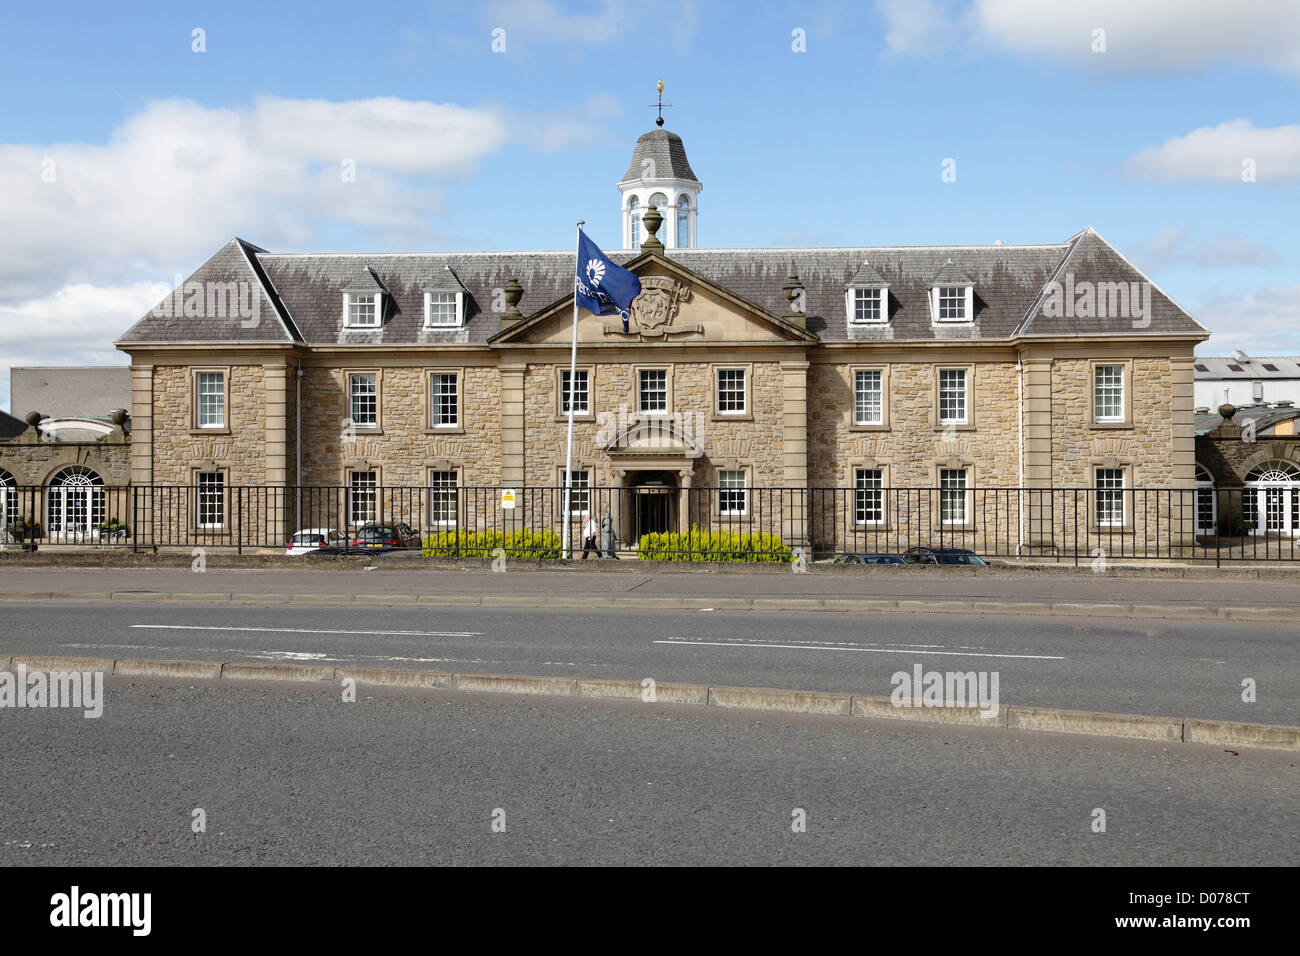 This site is permanently closed. Office building at Chivas Regal whisky company on Renfrew Road in Paisley, Renfrewshire, Scotland, UK Stock Photo